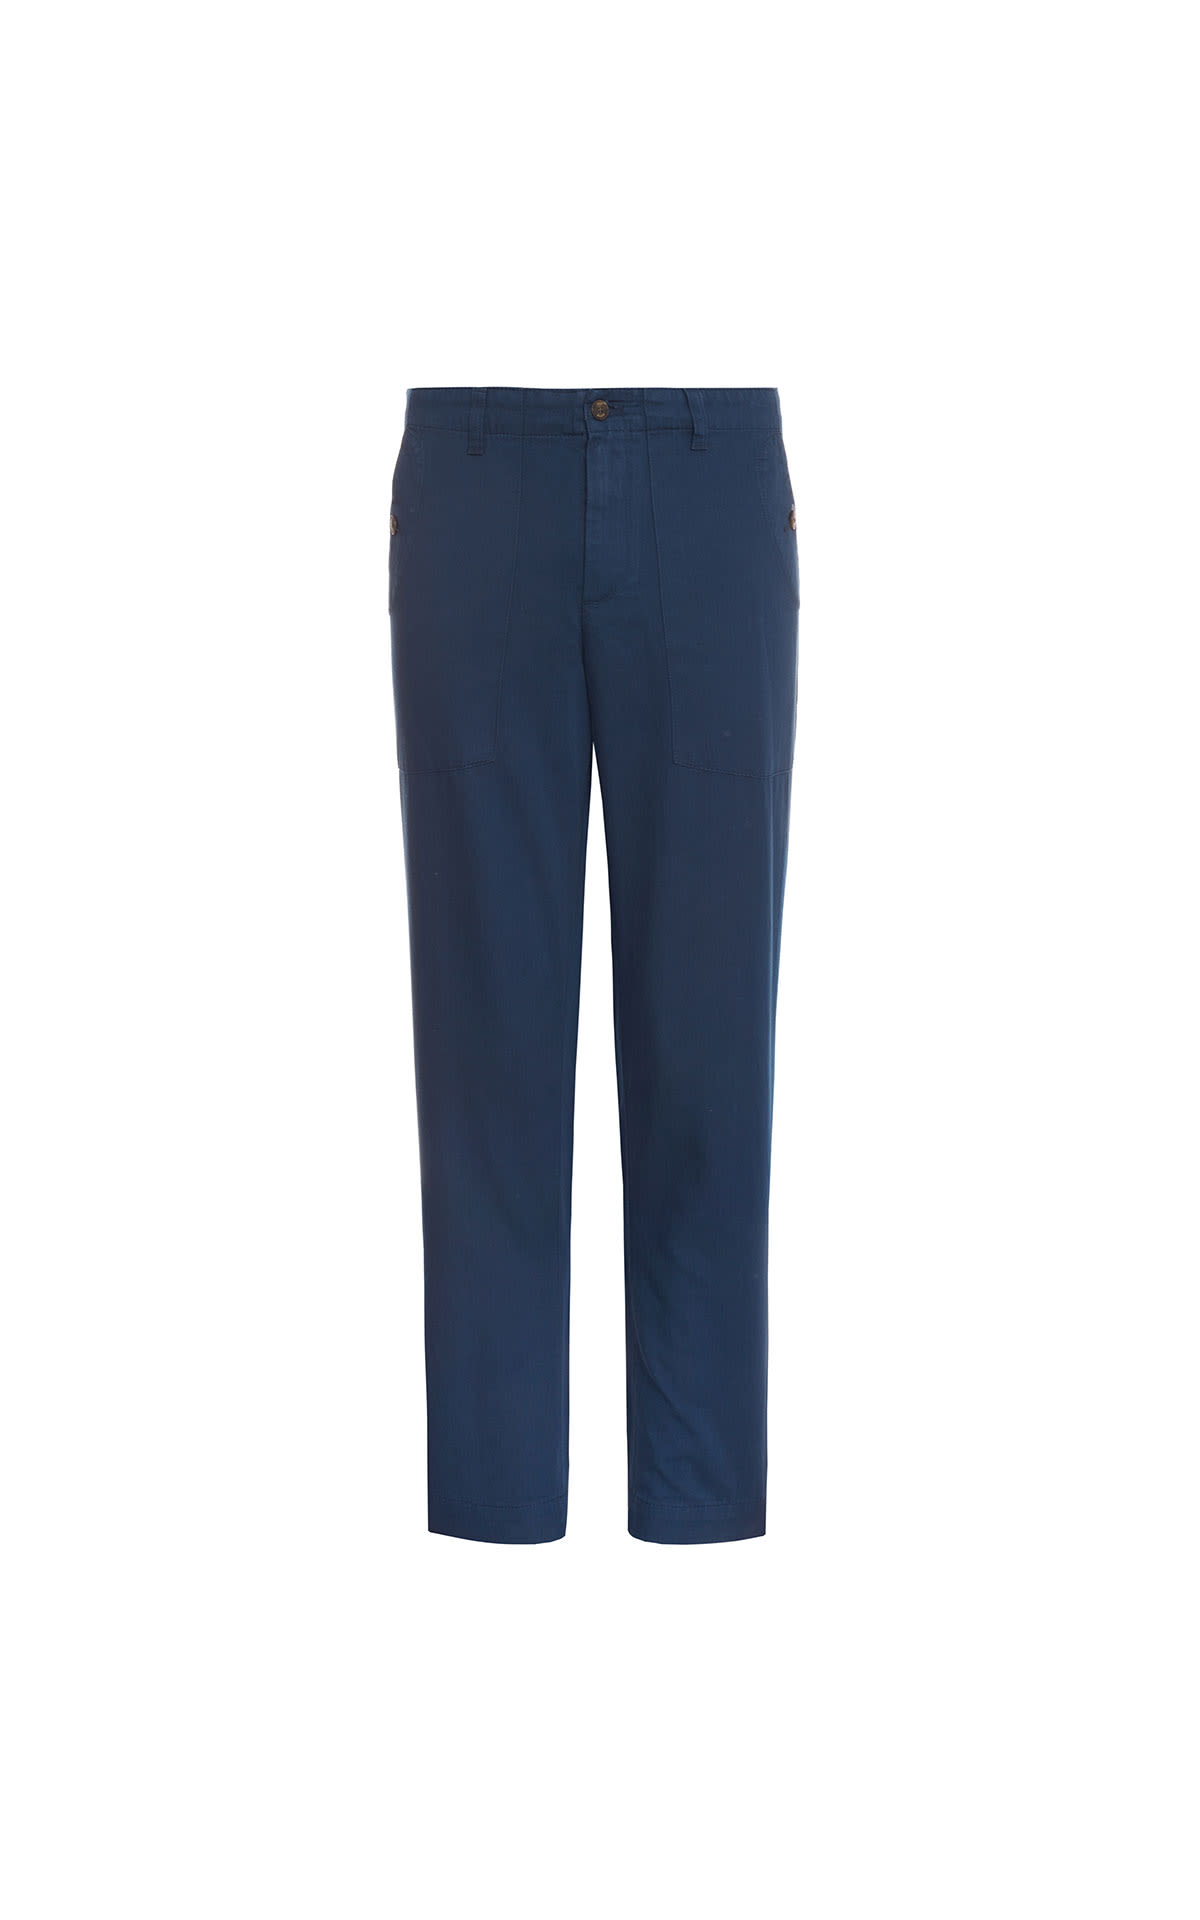 Ted Baker Utility trouser from Bicester Village